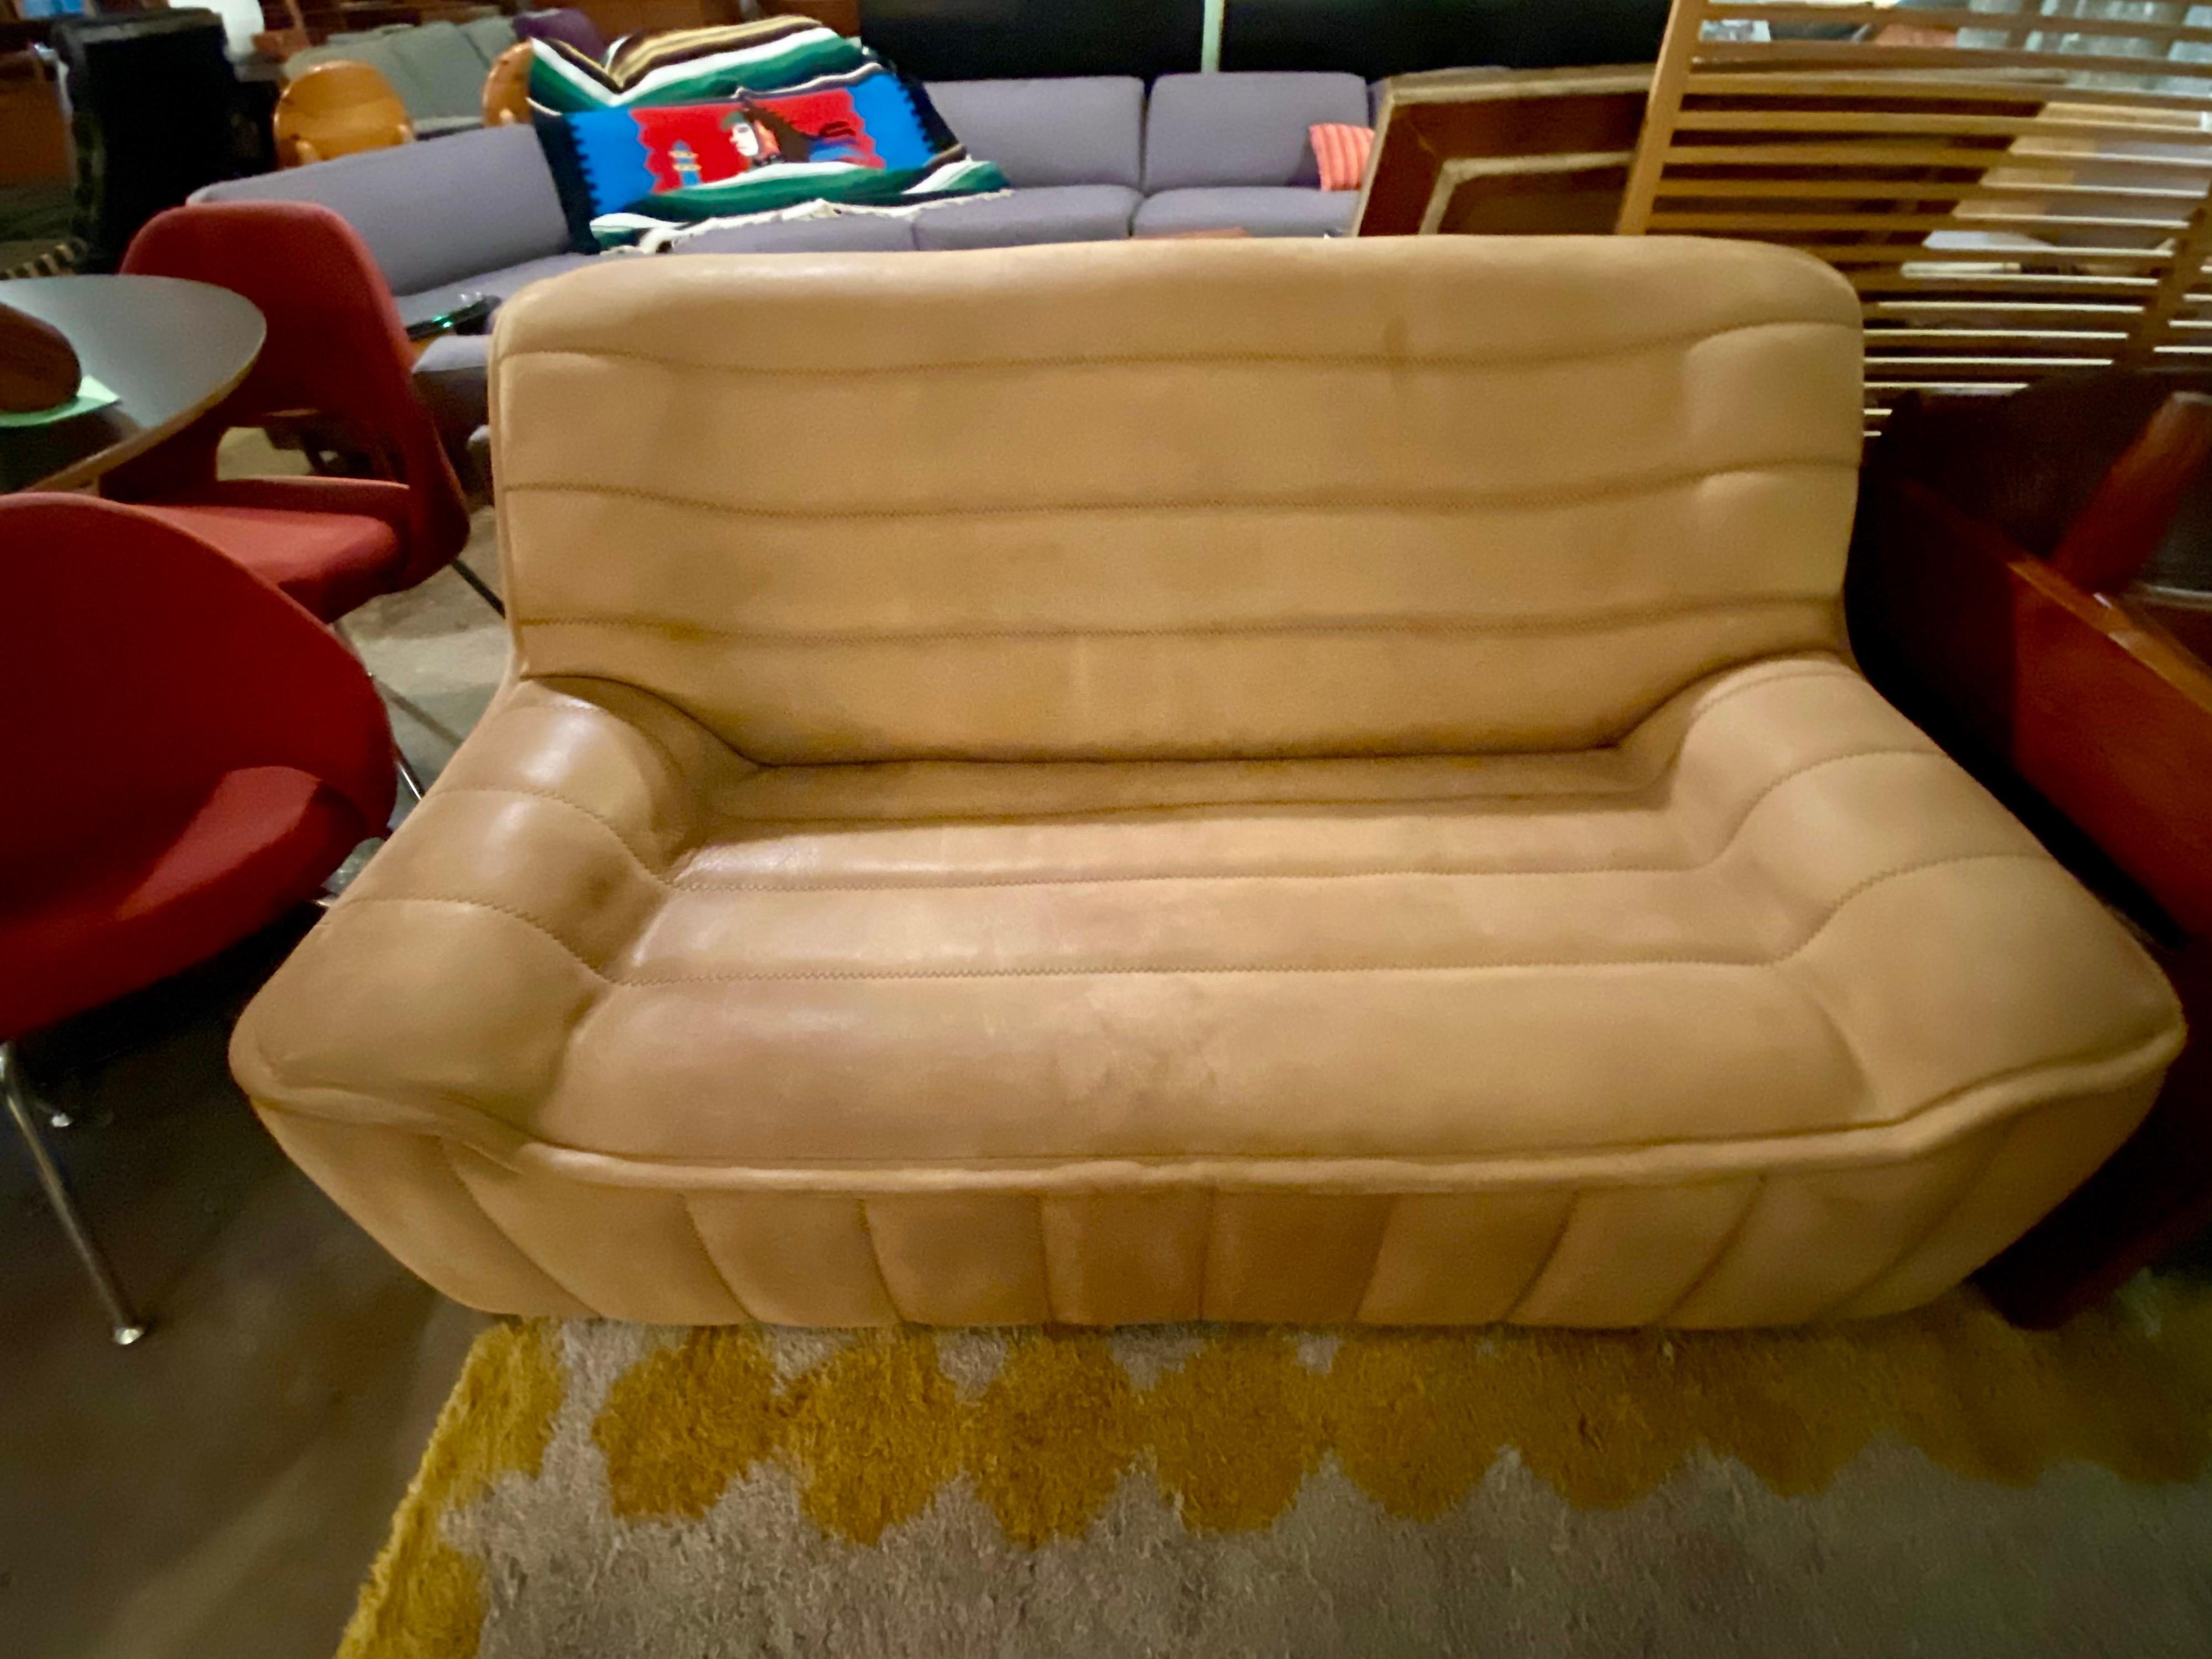 Beautiful pair of De Sede84 Sofa in Buffalo leather in warm beige color with a high back and armrests. Beautiful patina and very good condition. Made in Switzerland, de Sede is renowned for its high-quality, handcrafted luxurious leather furniture,